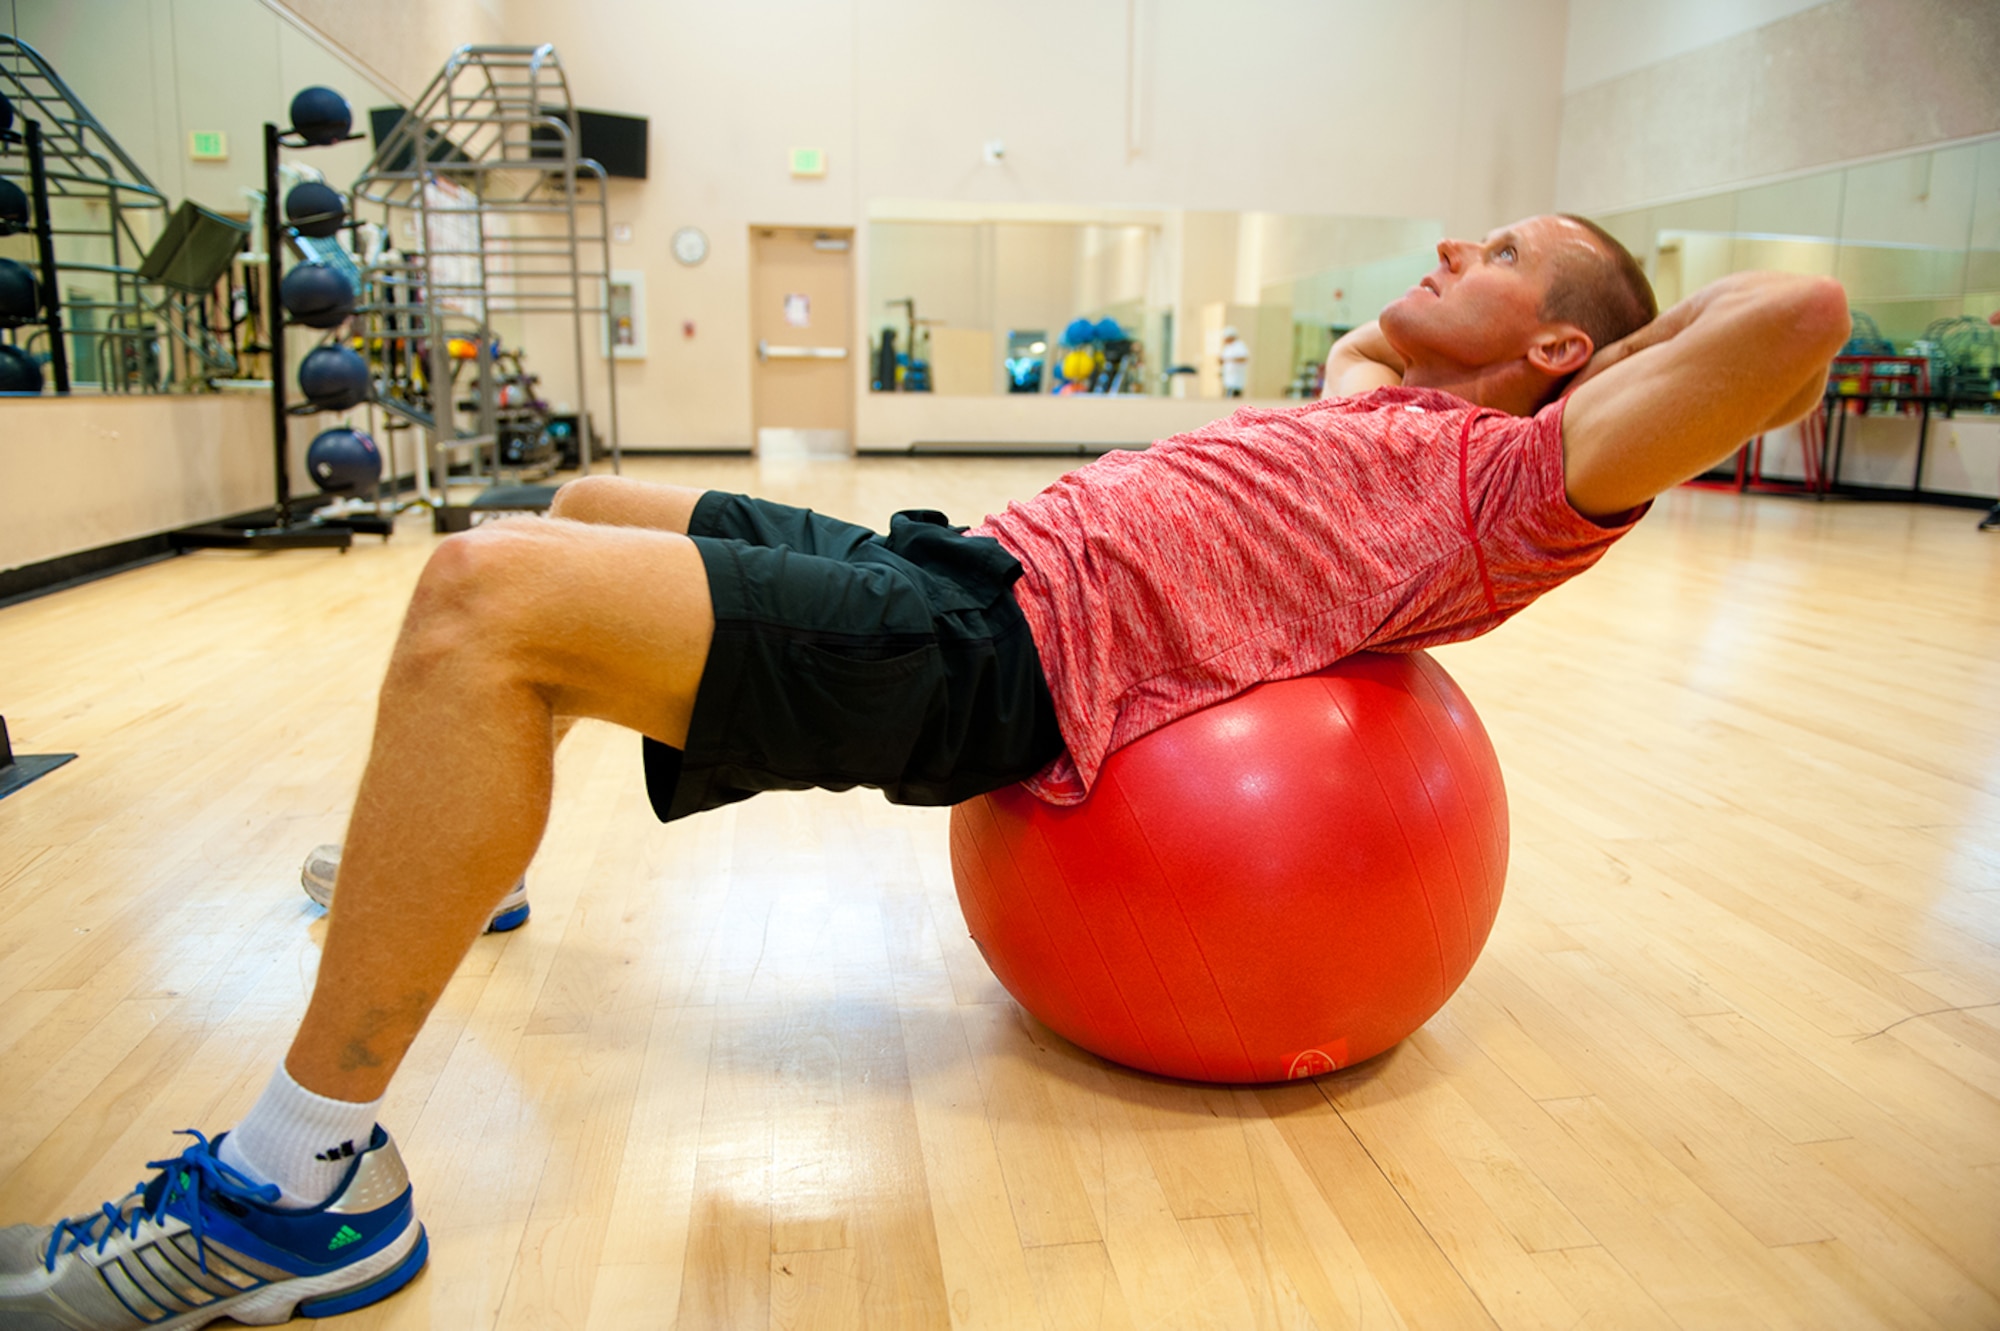 U.S. Air Force Lt. Col. Stephen Frank, instructor pilot, 559 Flying Training Squadron, uses a Swiss ball with his crunches, 16 July, 2014, Joint Base San Antonio-Randolph, Texas. (U.S. Air Force photo by Tech. Sgt. Sarayuth Pinthong/ Released)